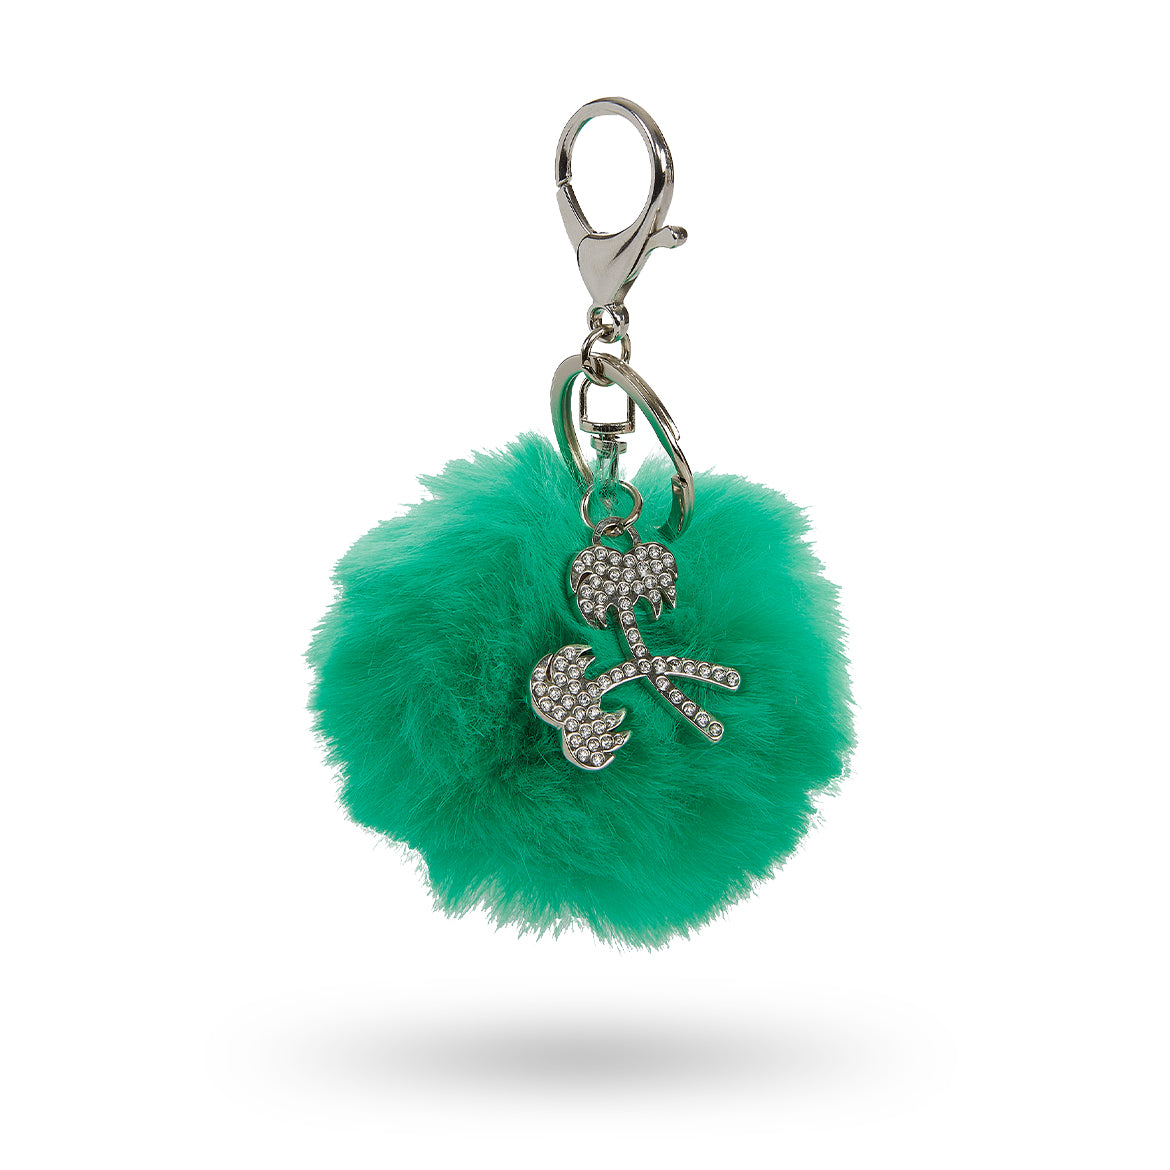 POM POM KEYCHAIN – In-N-Out Burger Company Store